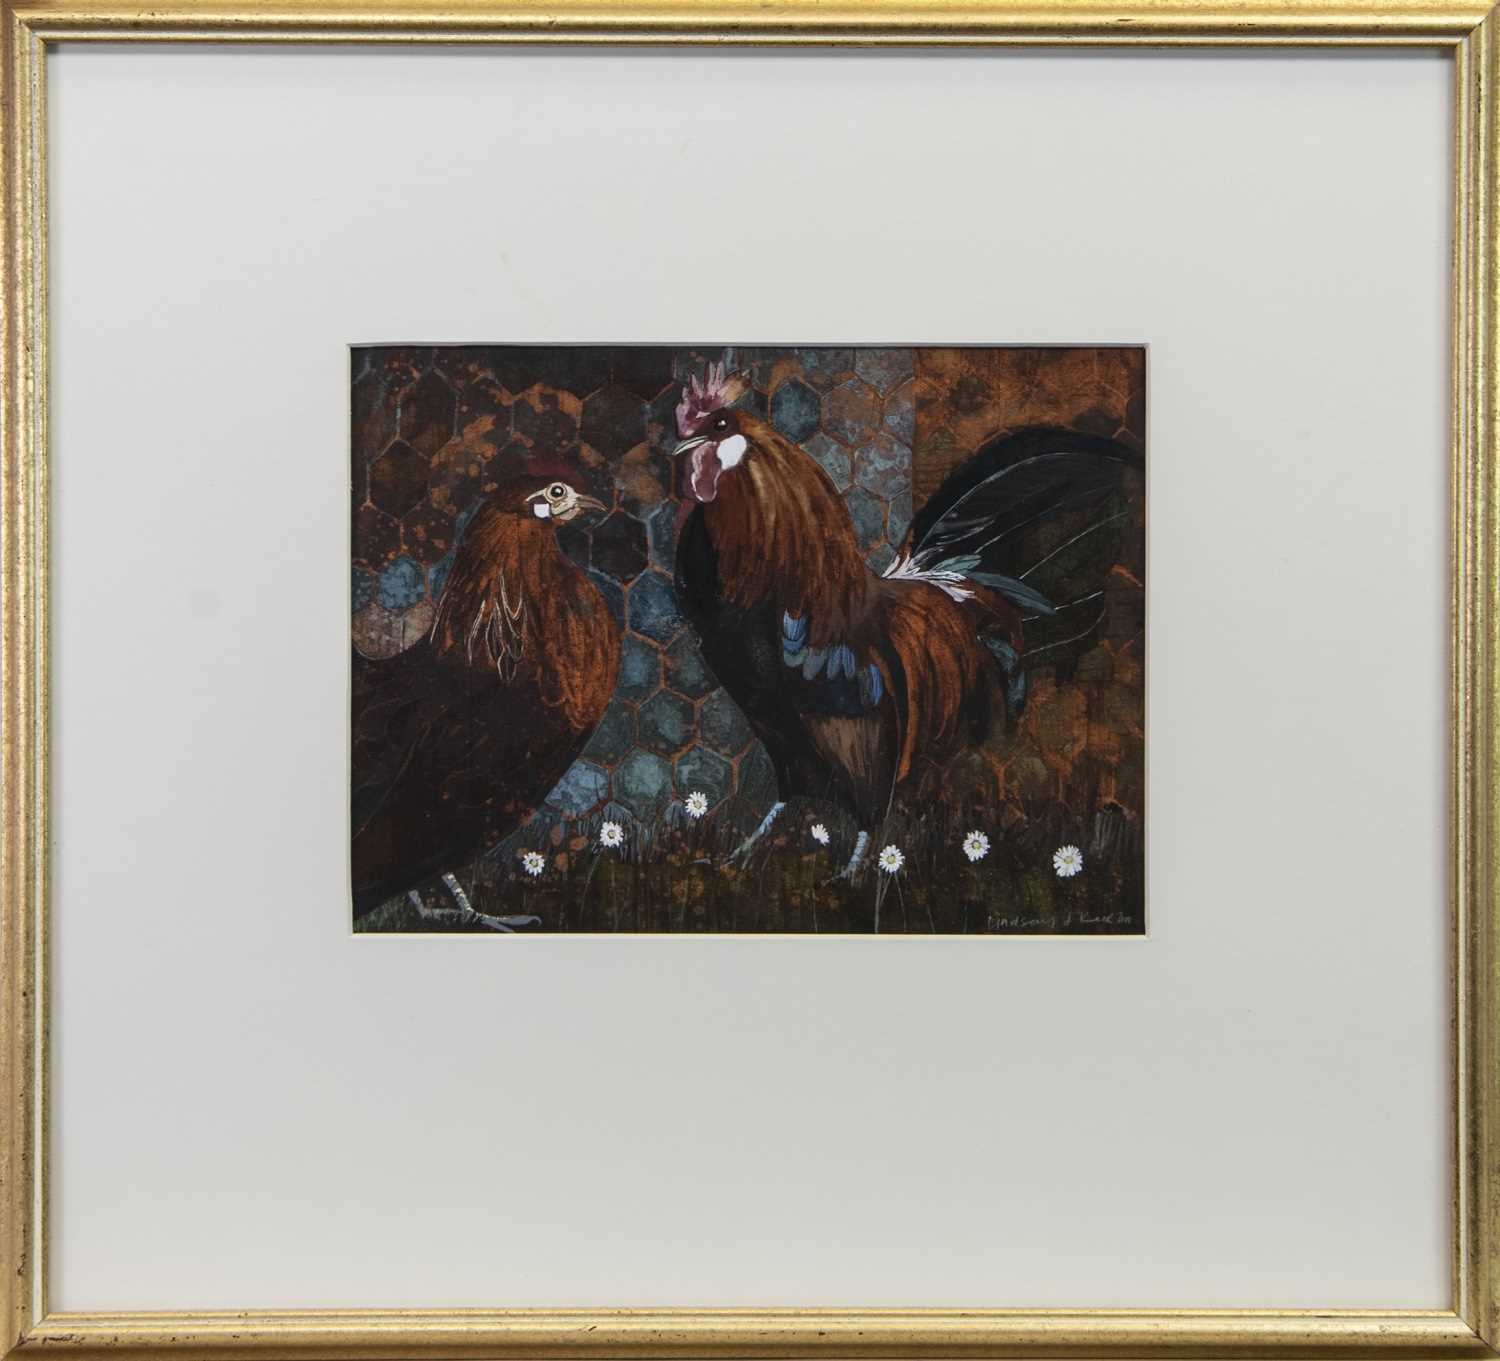 Lot 12 - TERRACOTTA CHICKENS, A GOUACHE BY LINDSAY J KEIR